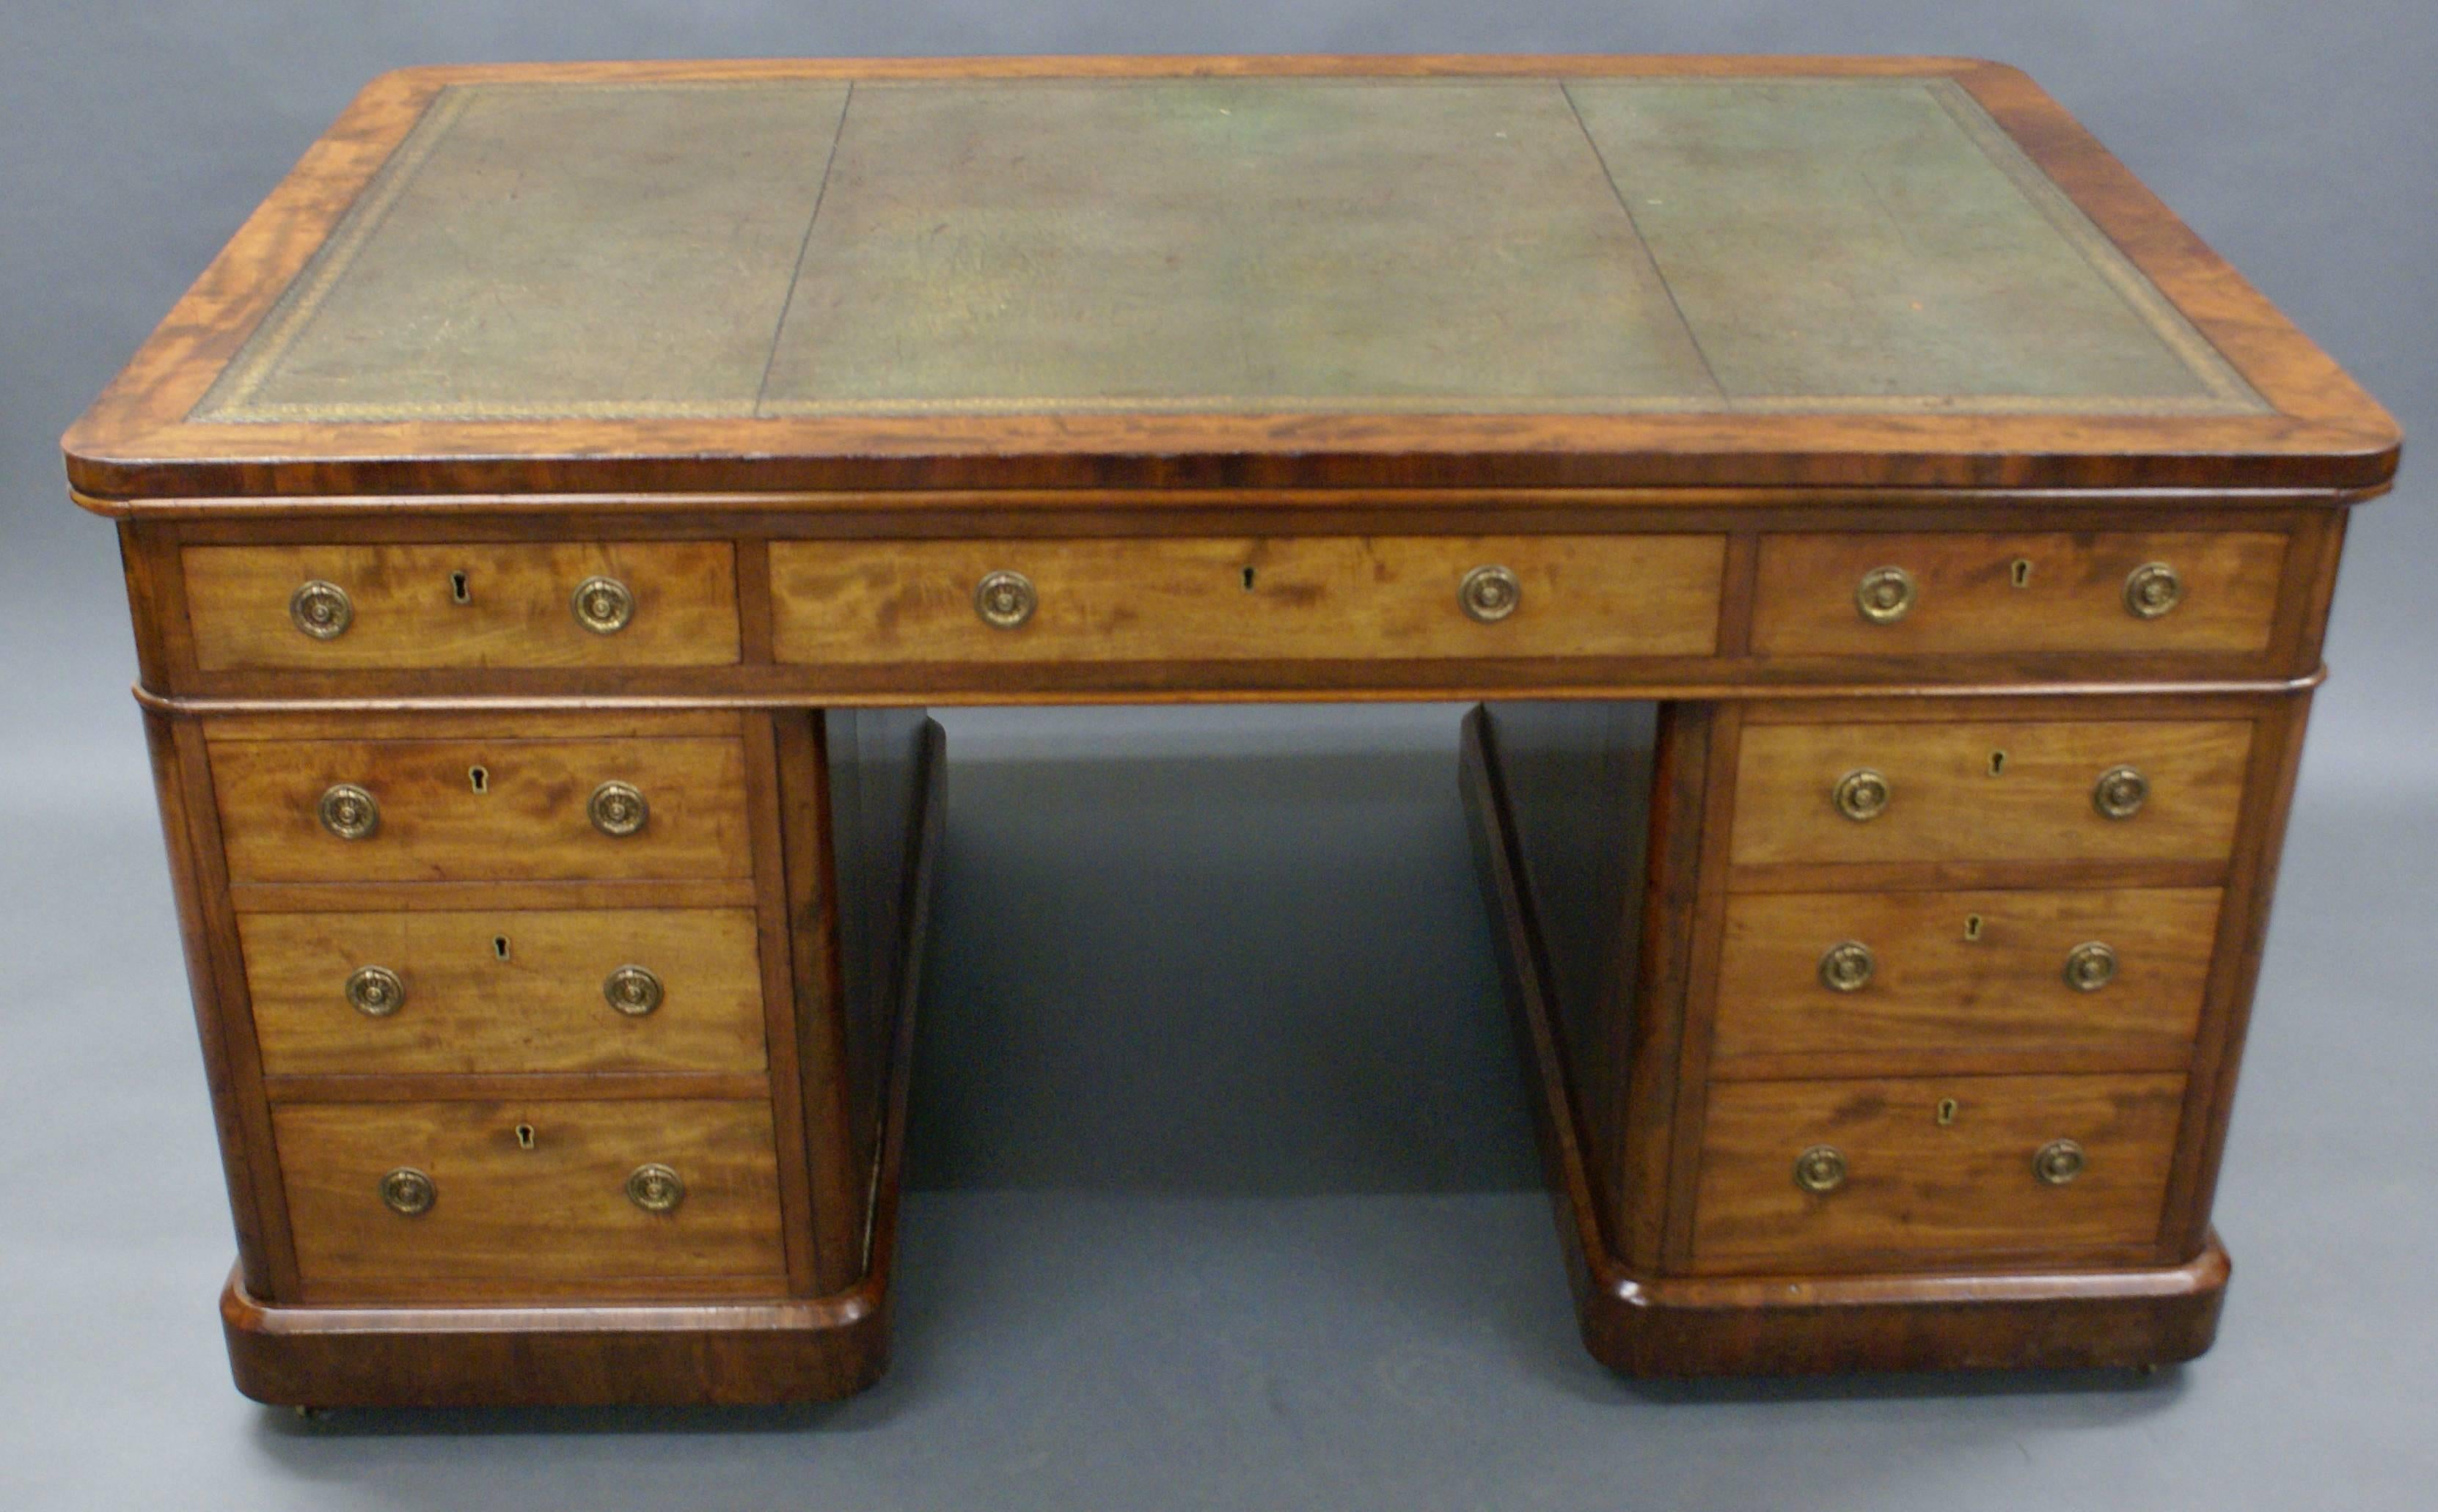 In well figured mahogany with nine mahogany lined drawers to one side and three drawers over two cupboards on the reverse. With re-entrant corners and standing on castors, this lovely desk has a long grain banding surrounding a gilt tooled leather